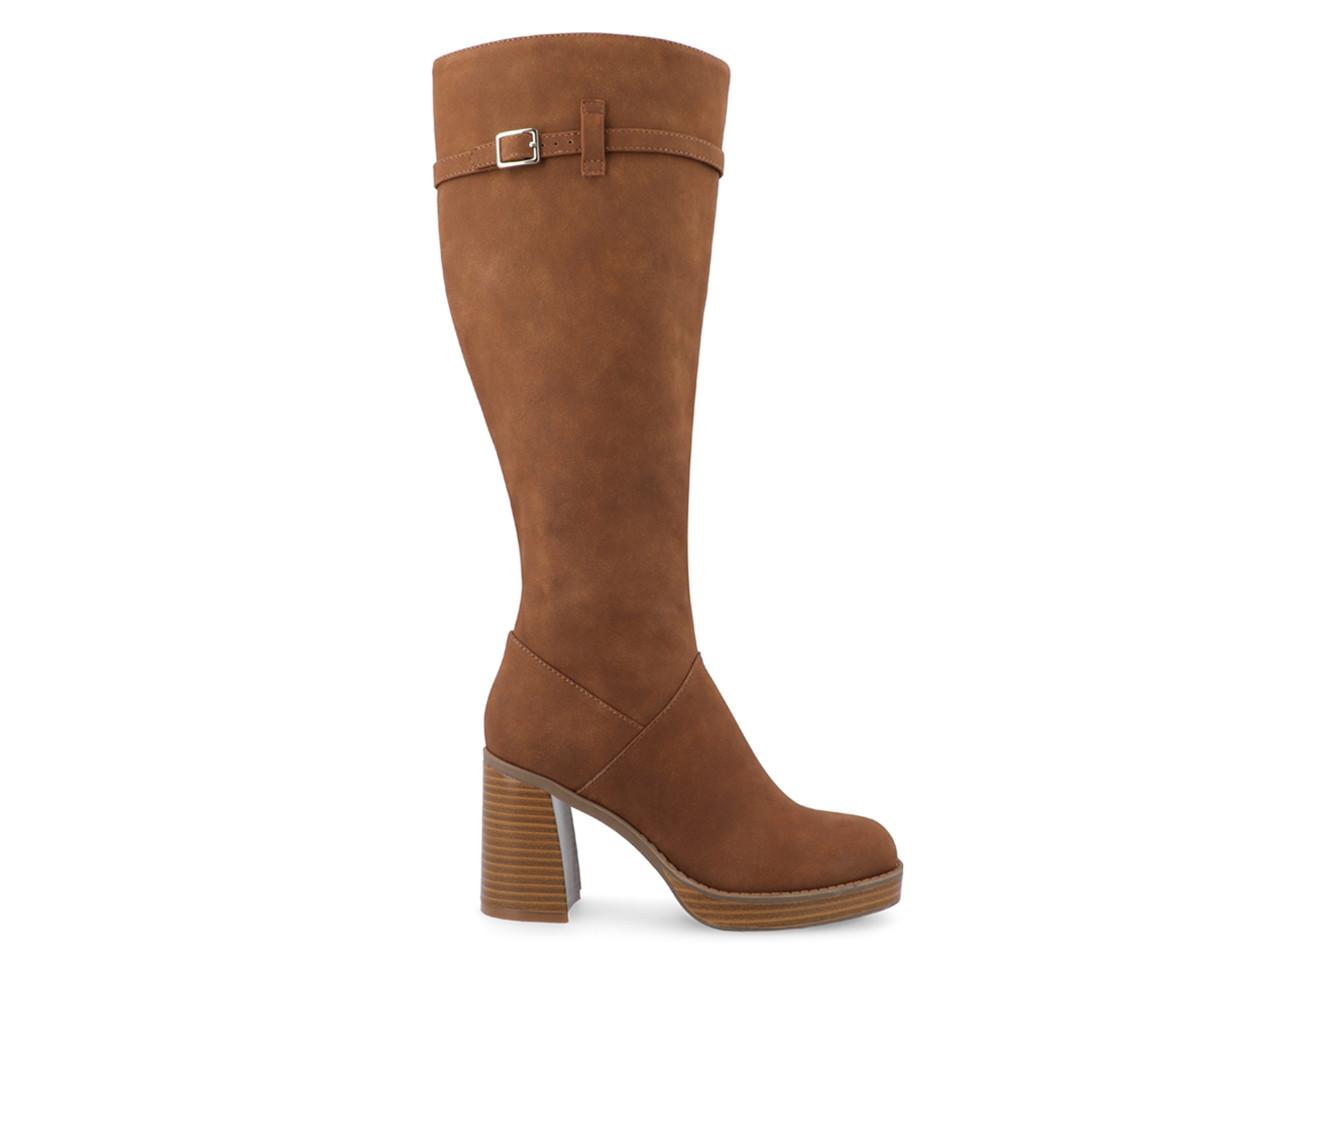 Women's Journee Collection Letice Knee High Boots